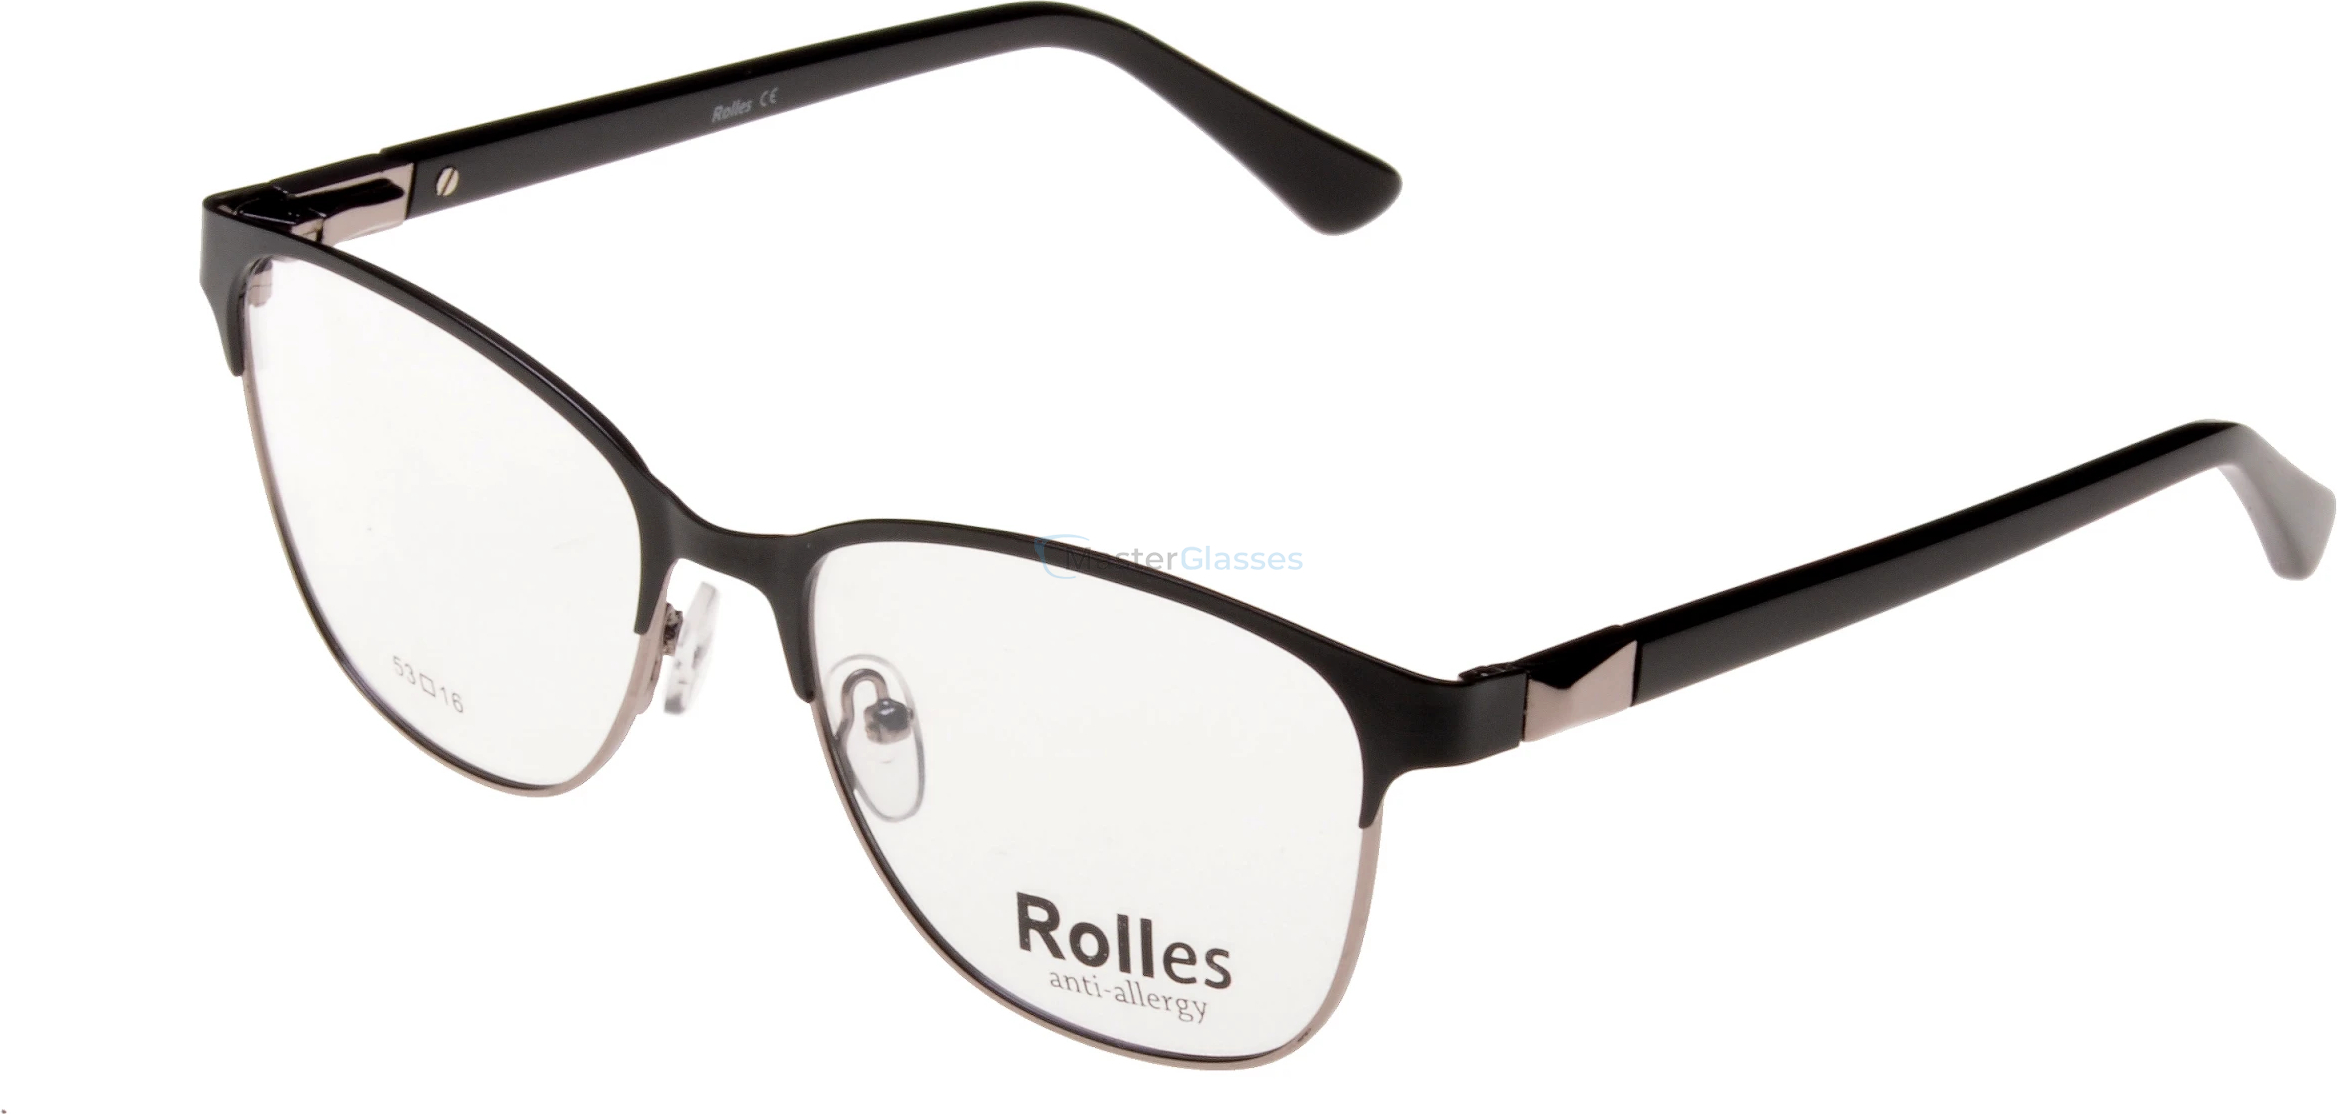  Rolles 468 01